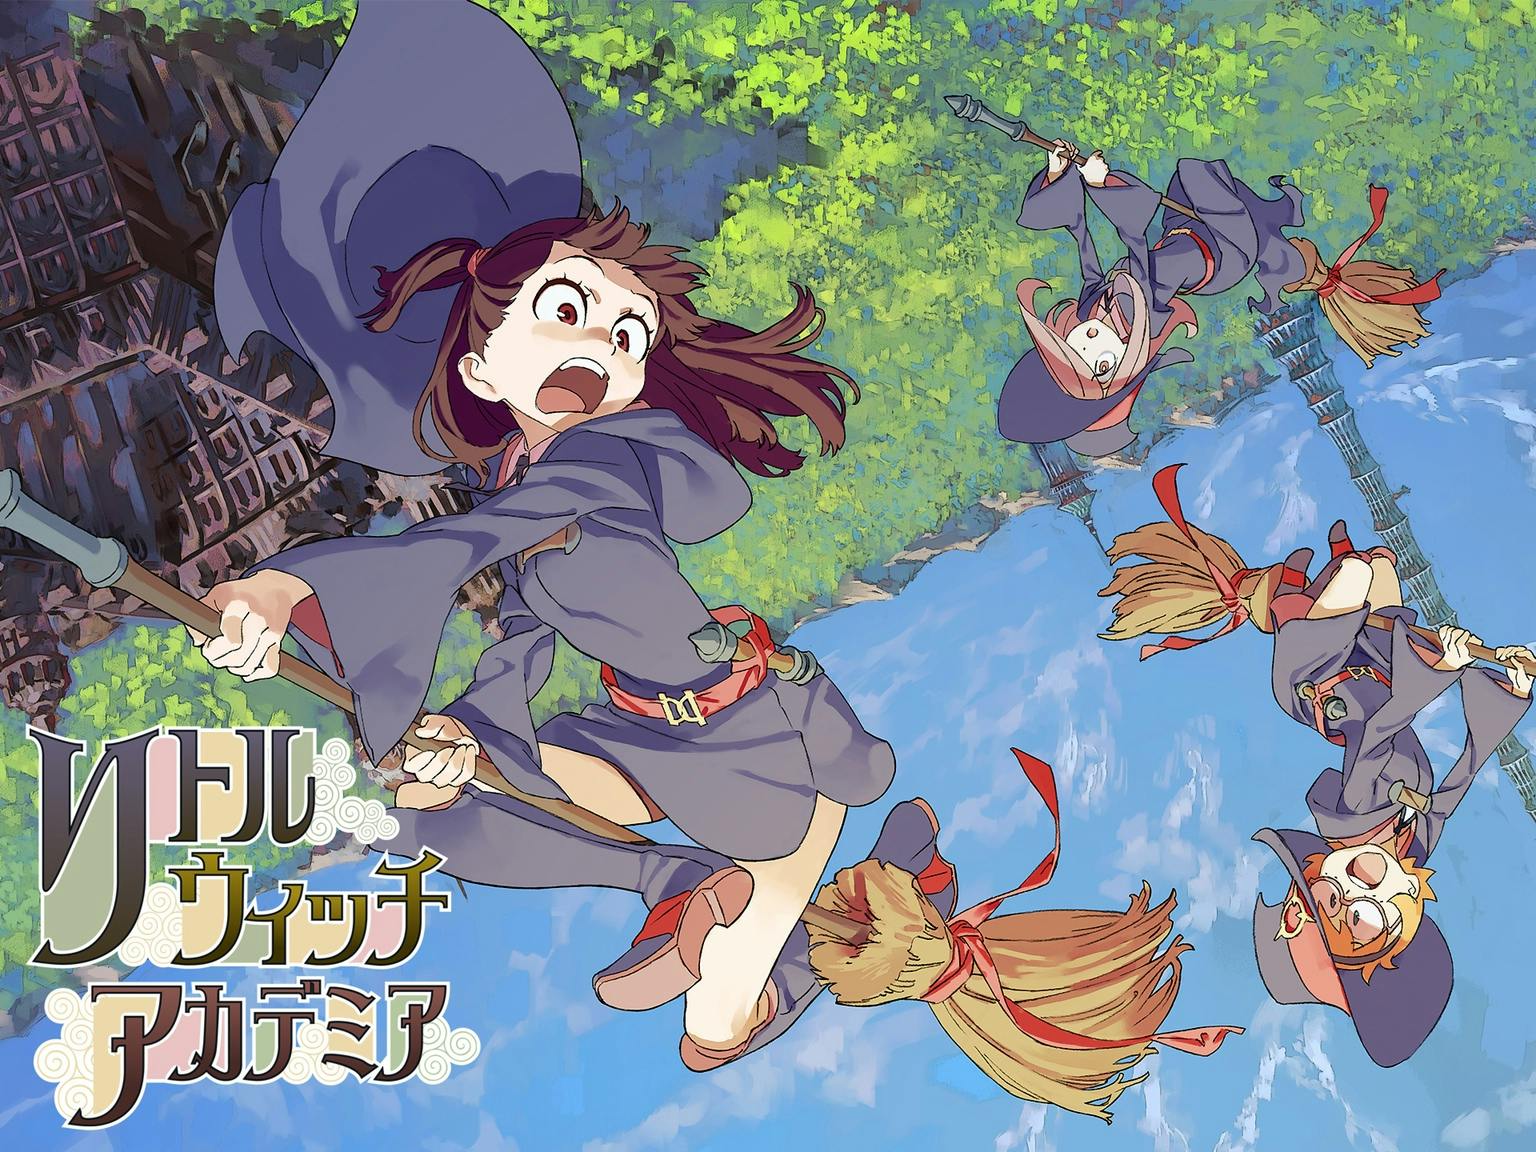 best anime series on netflix: Little Witch Academia